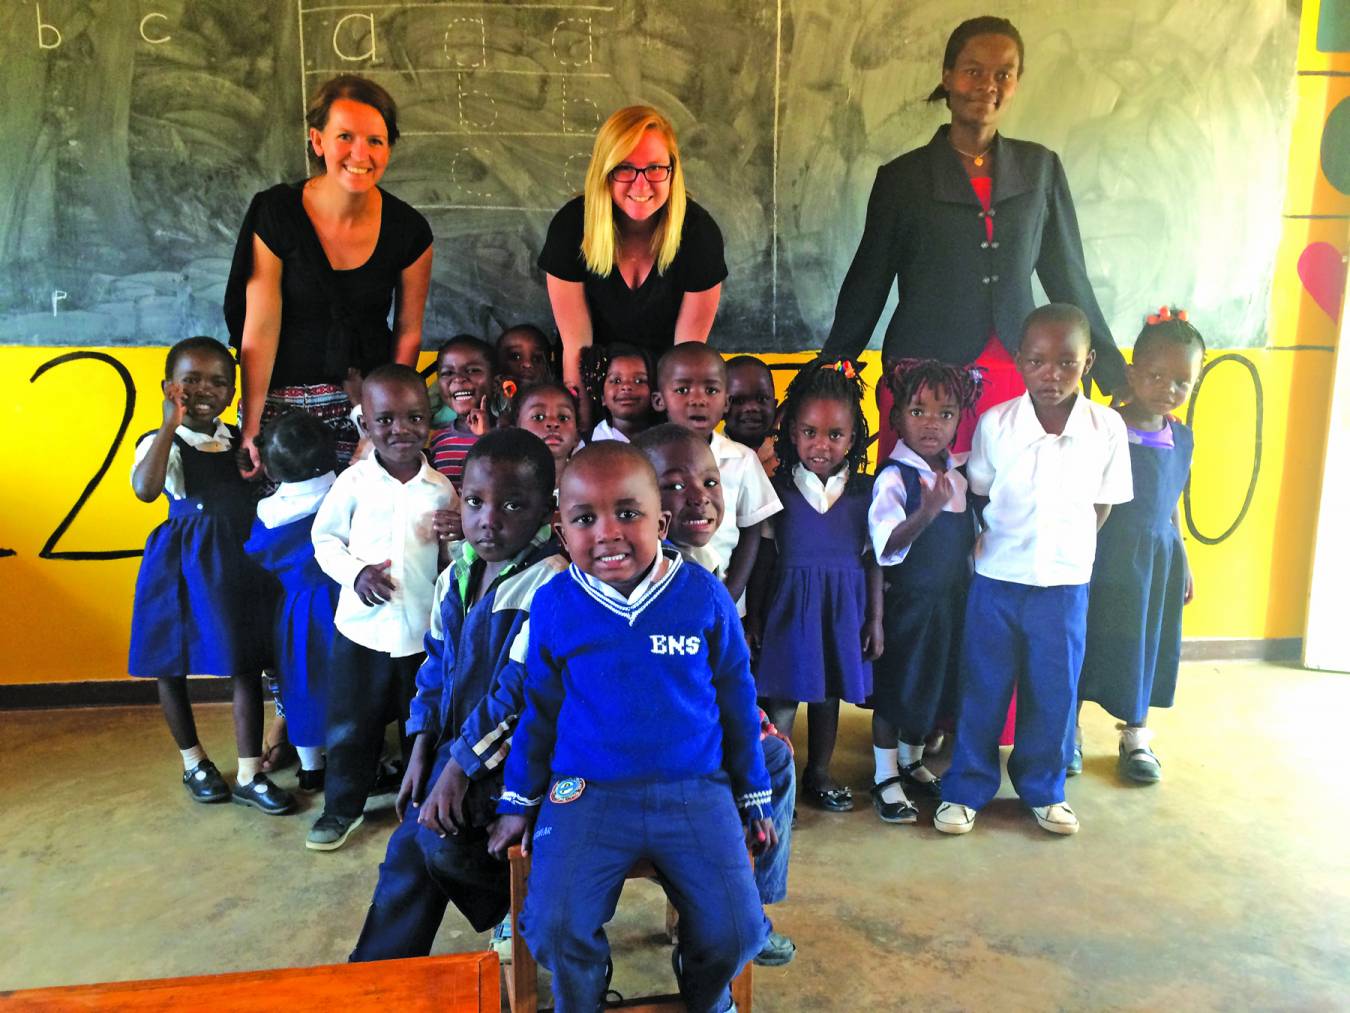 Rector taught English to young school children in Malawi.